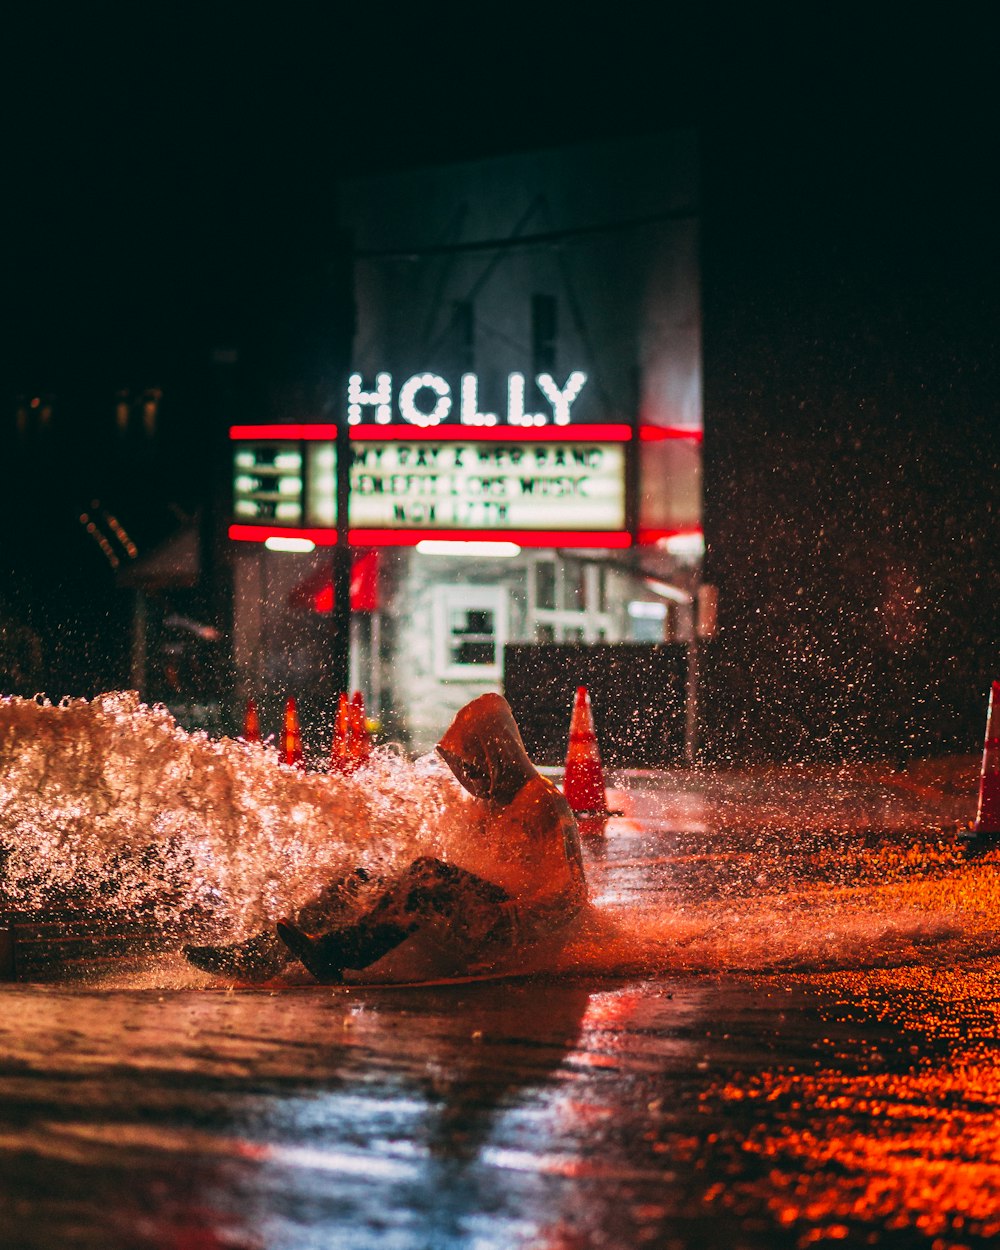 person sitting on watery road near Holly building